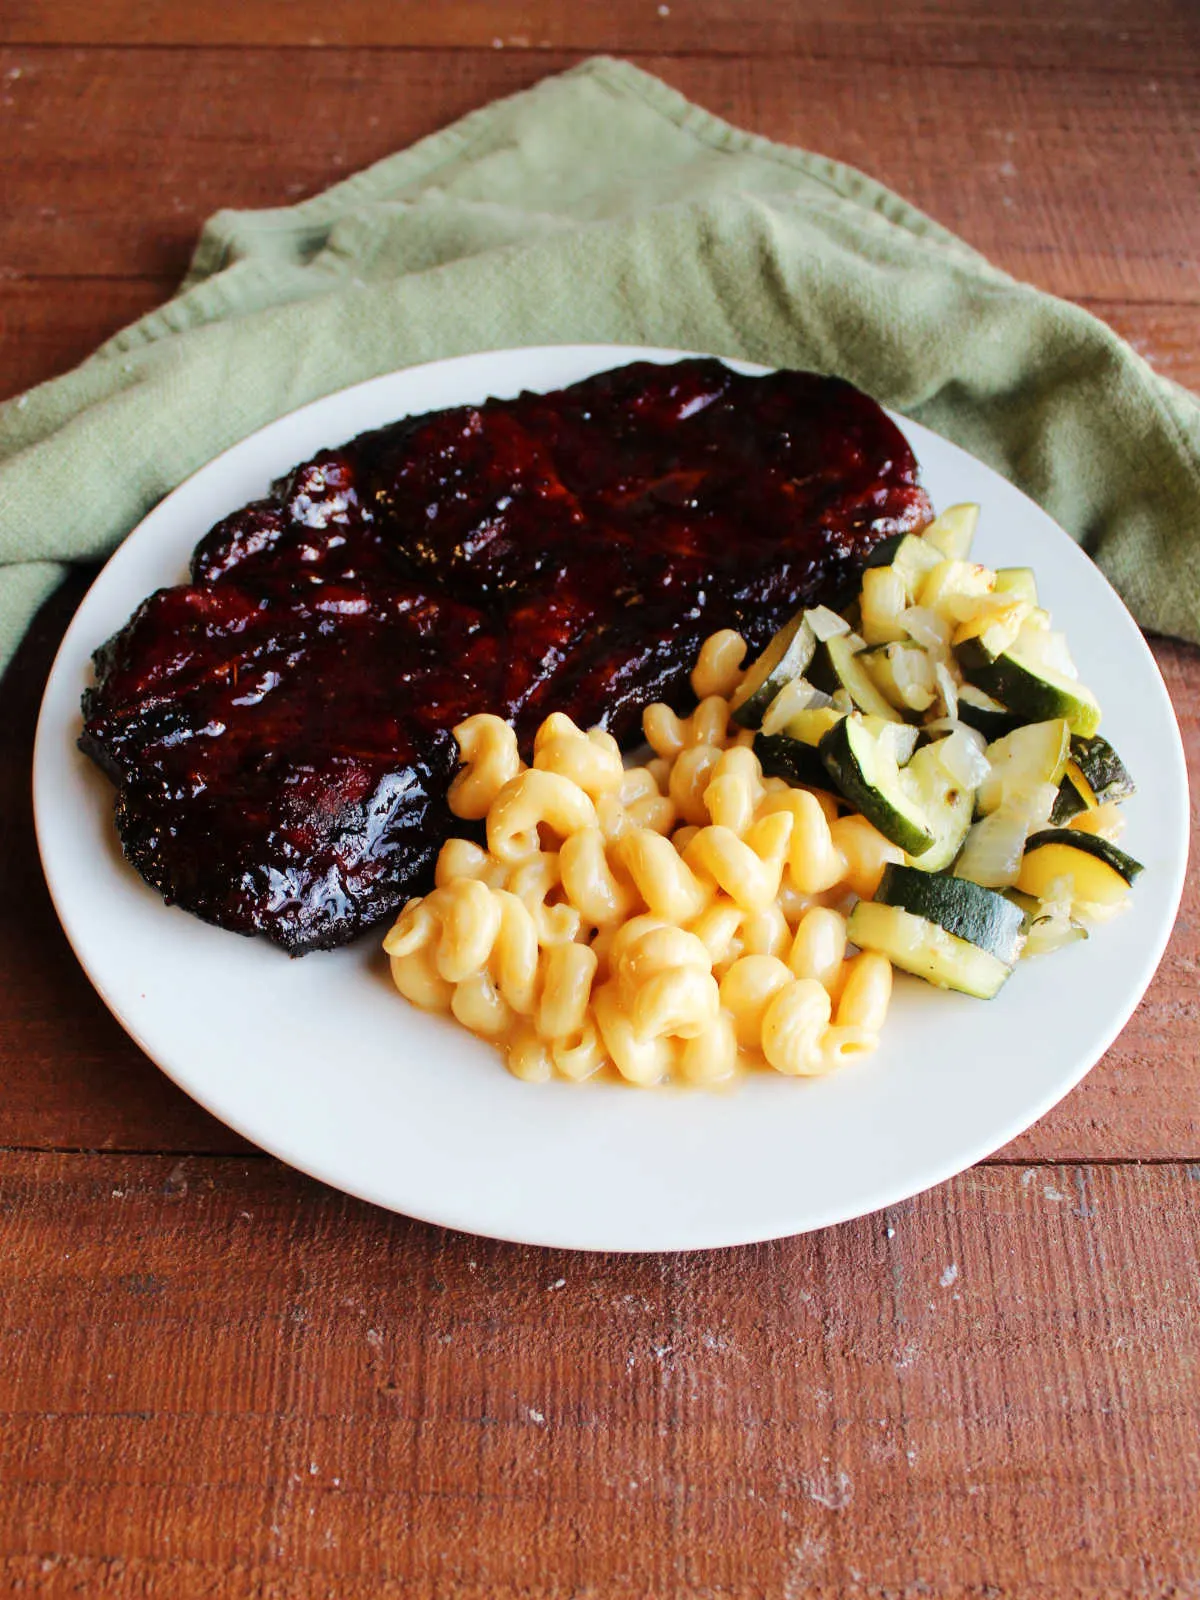 Curly mac and cheese served with BBQ pork steak and zucchini.